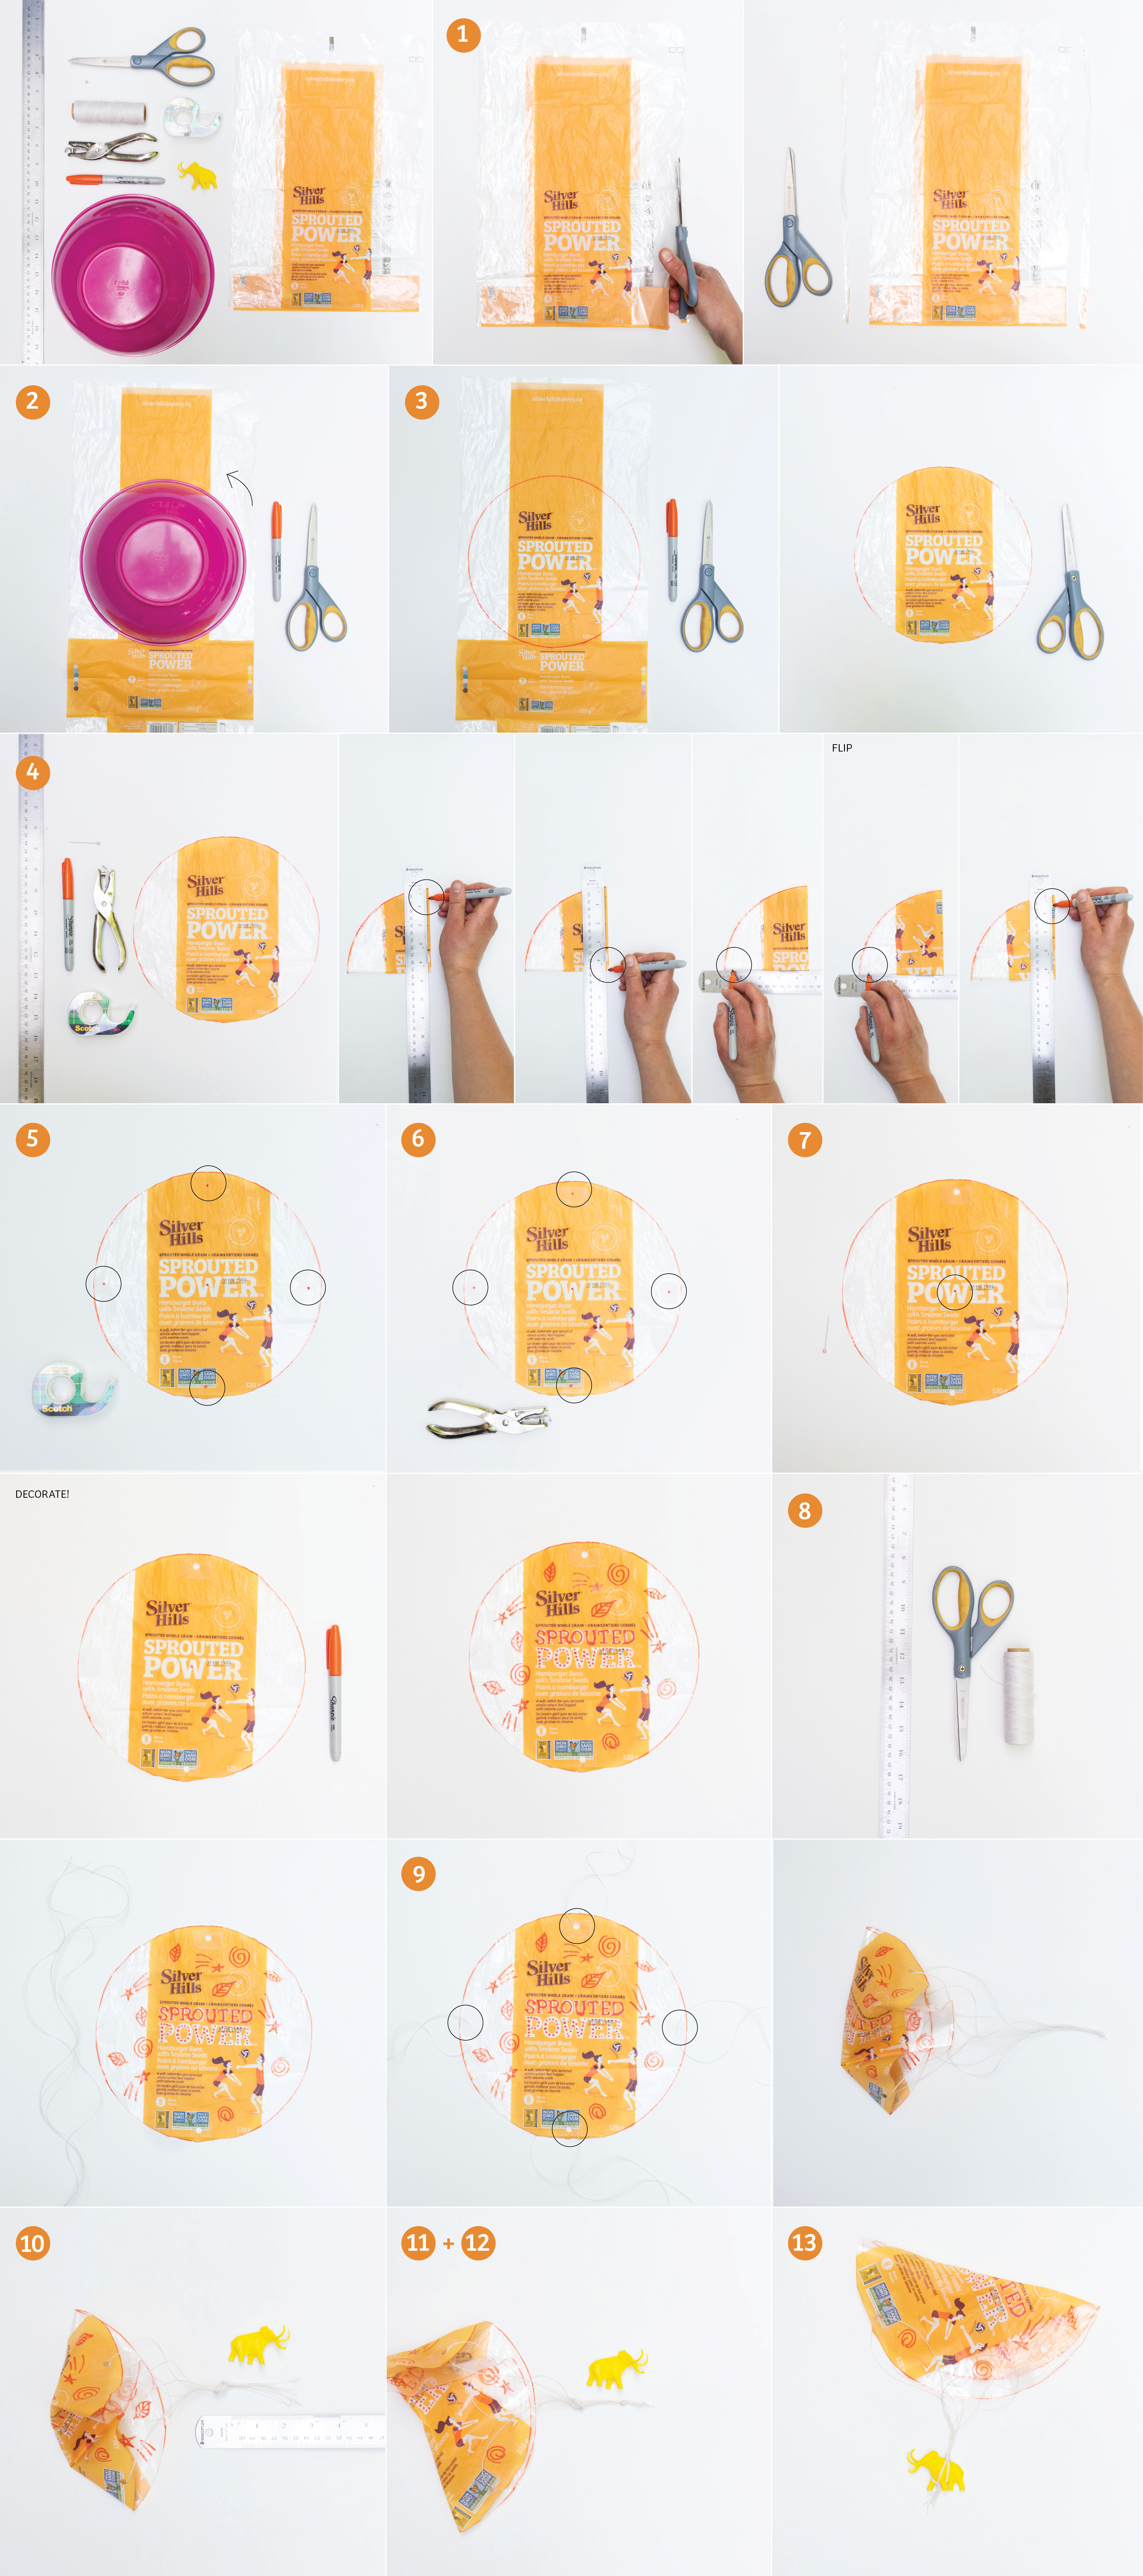 Bread Bag STEM Activities: Step-by-Step Photo Instructions for a Make At Home Parachute